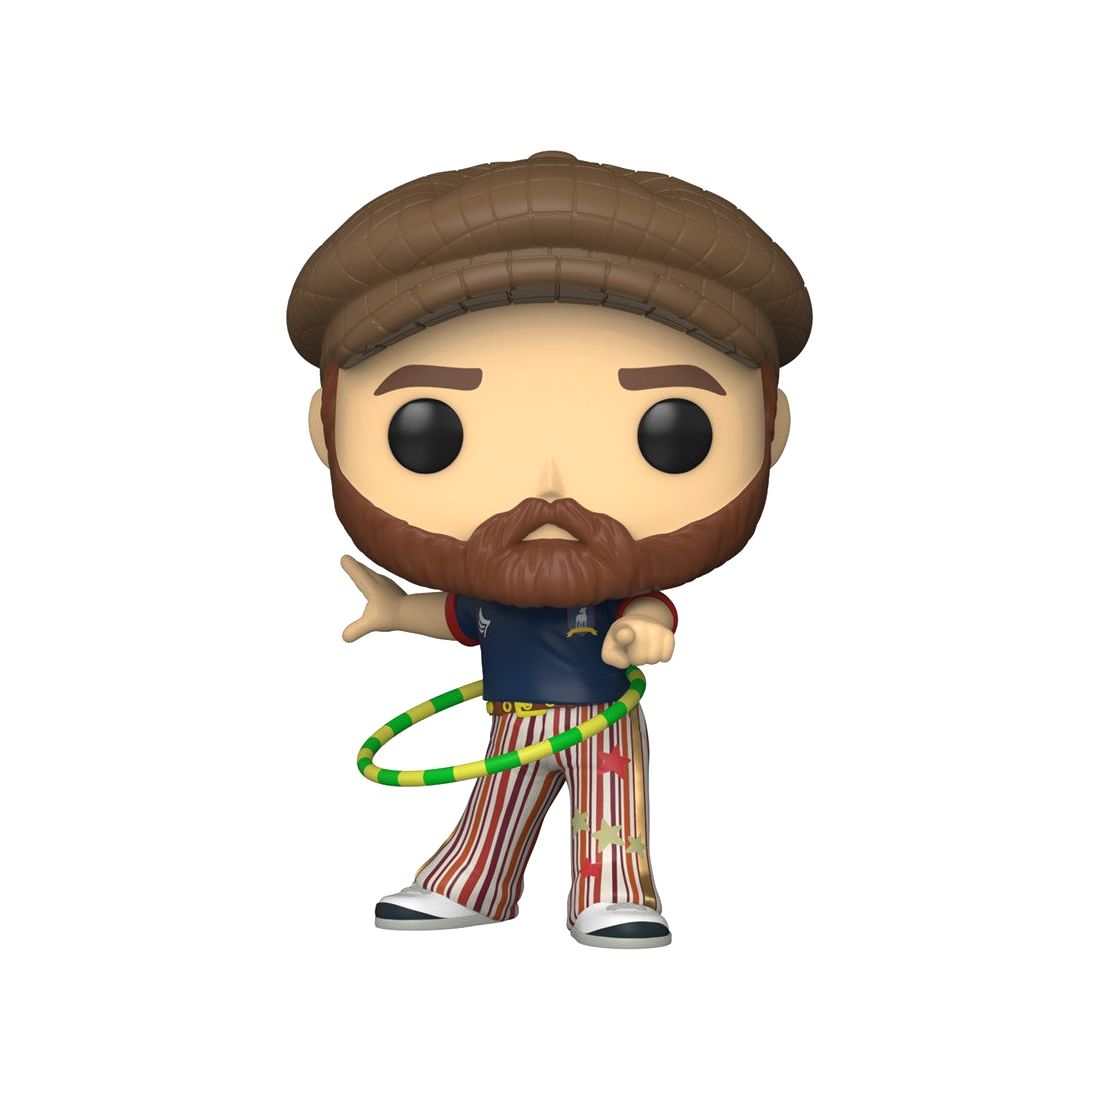 Funko Pop! Television Ted Lasso Beard With Goldy Pants NYCC 2022 3.75-Inch Vinyl Figure